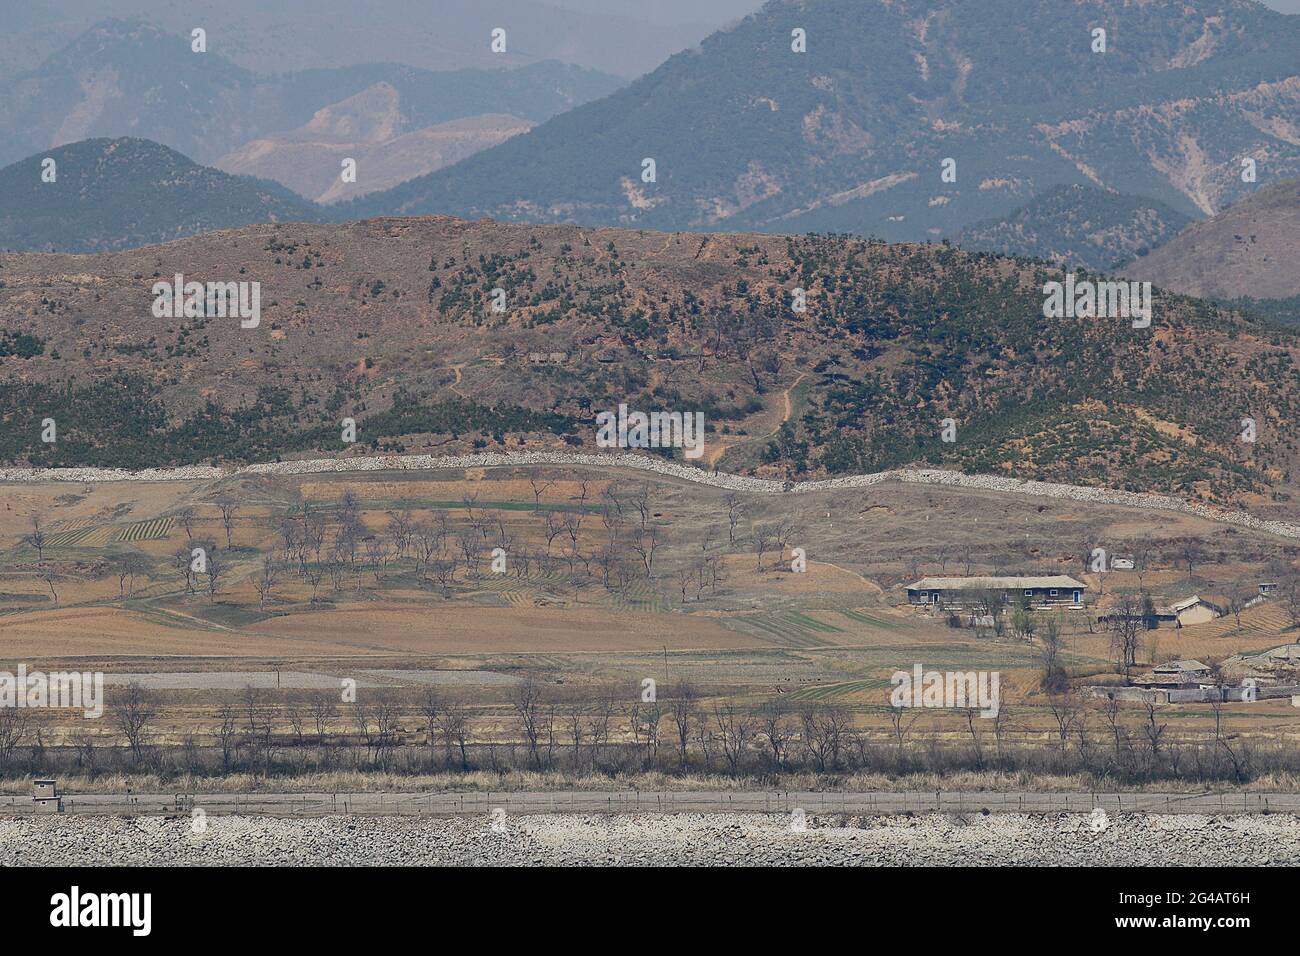 April 16, 2018-Ganghwa Island, South Korea-A View of North Korea Hwanghae Province One Village. View from Ganghwa Island border village. North Korean people are actively preparing for spring farming. The agenda for the third inter-Korean summit scheduled for April 27 is unlikely to have North Korean human rights issues despite calls for the inclusion by more than 200 NGOs earlier this week. Stock Photo